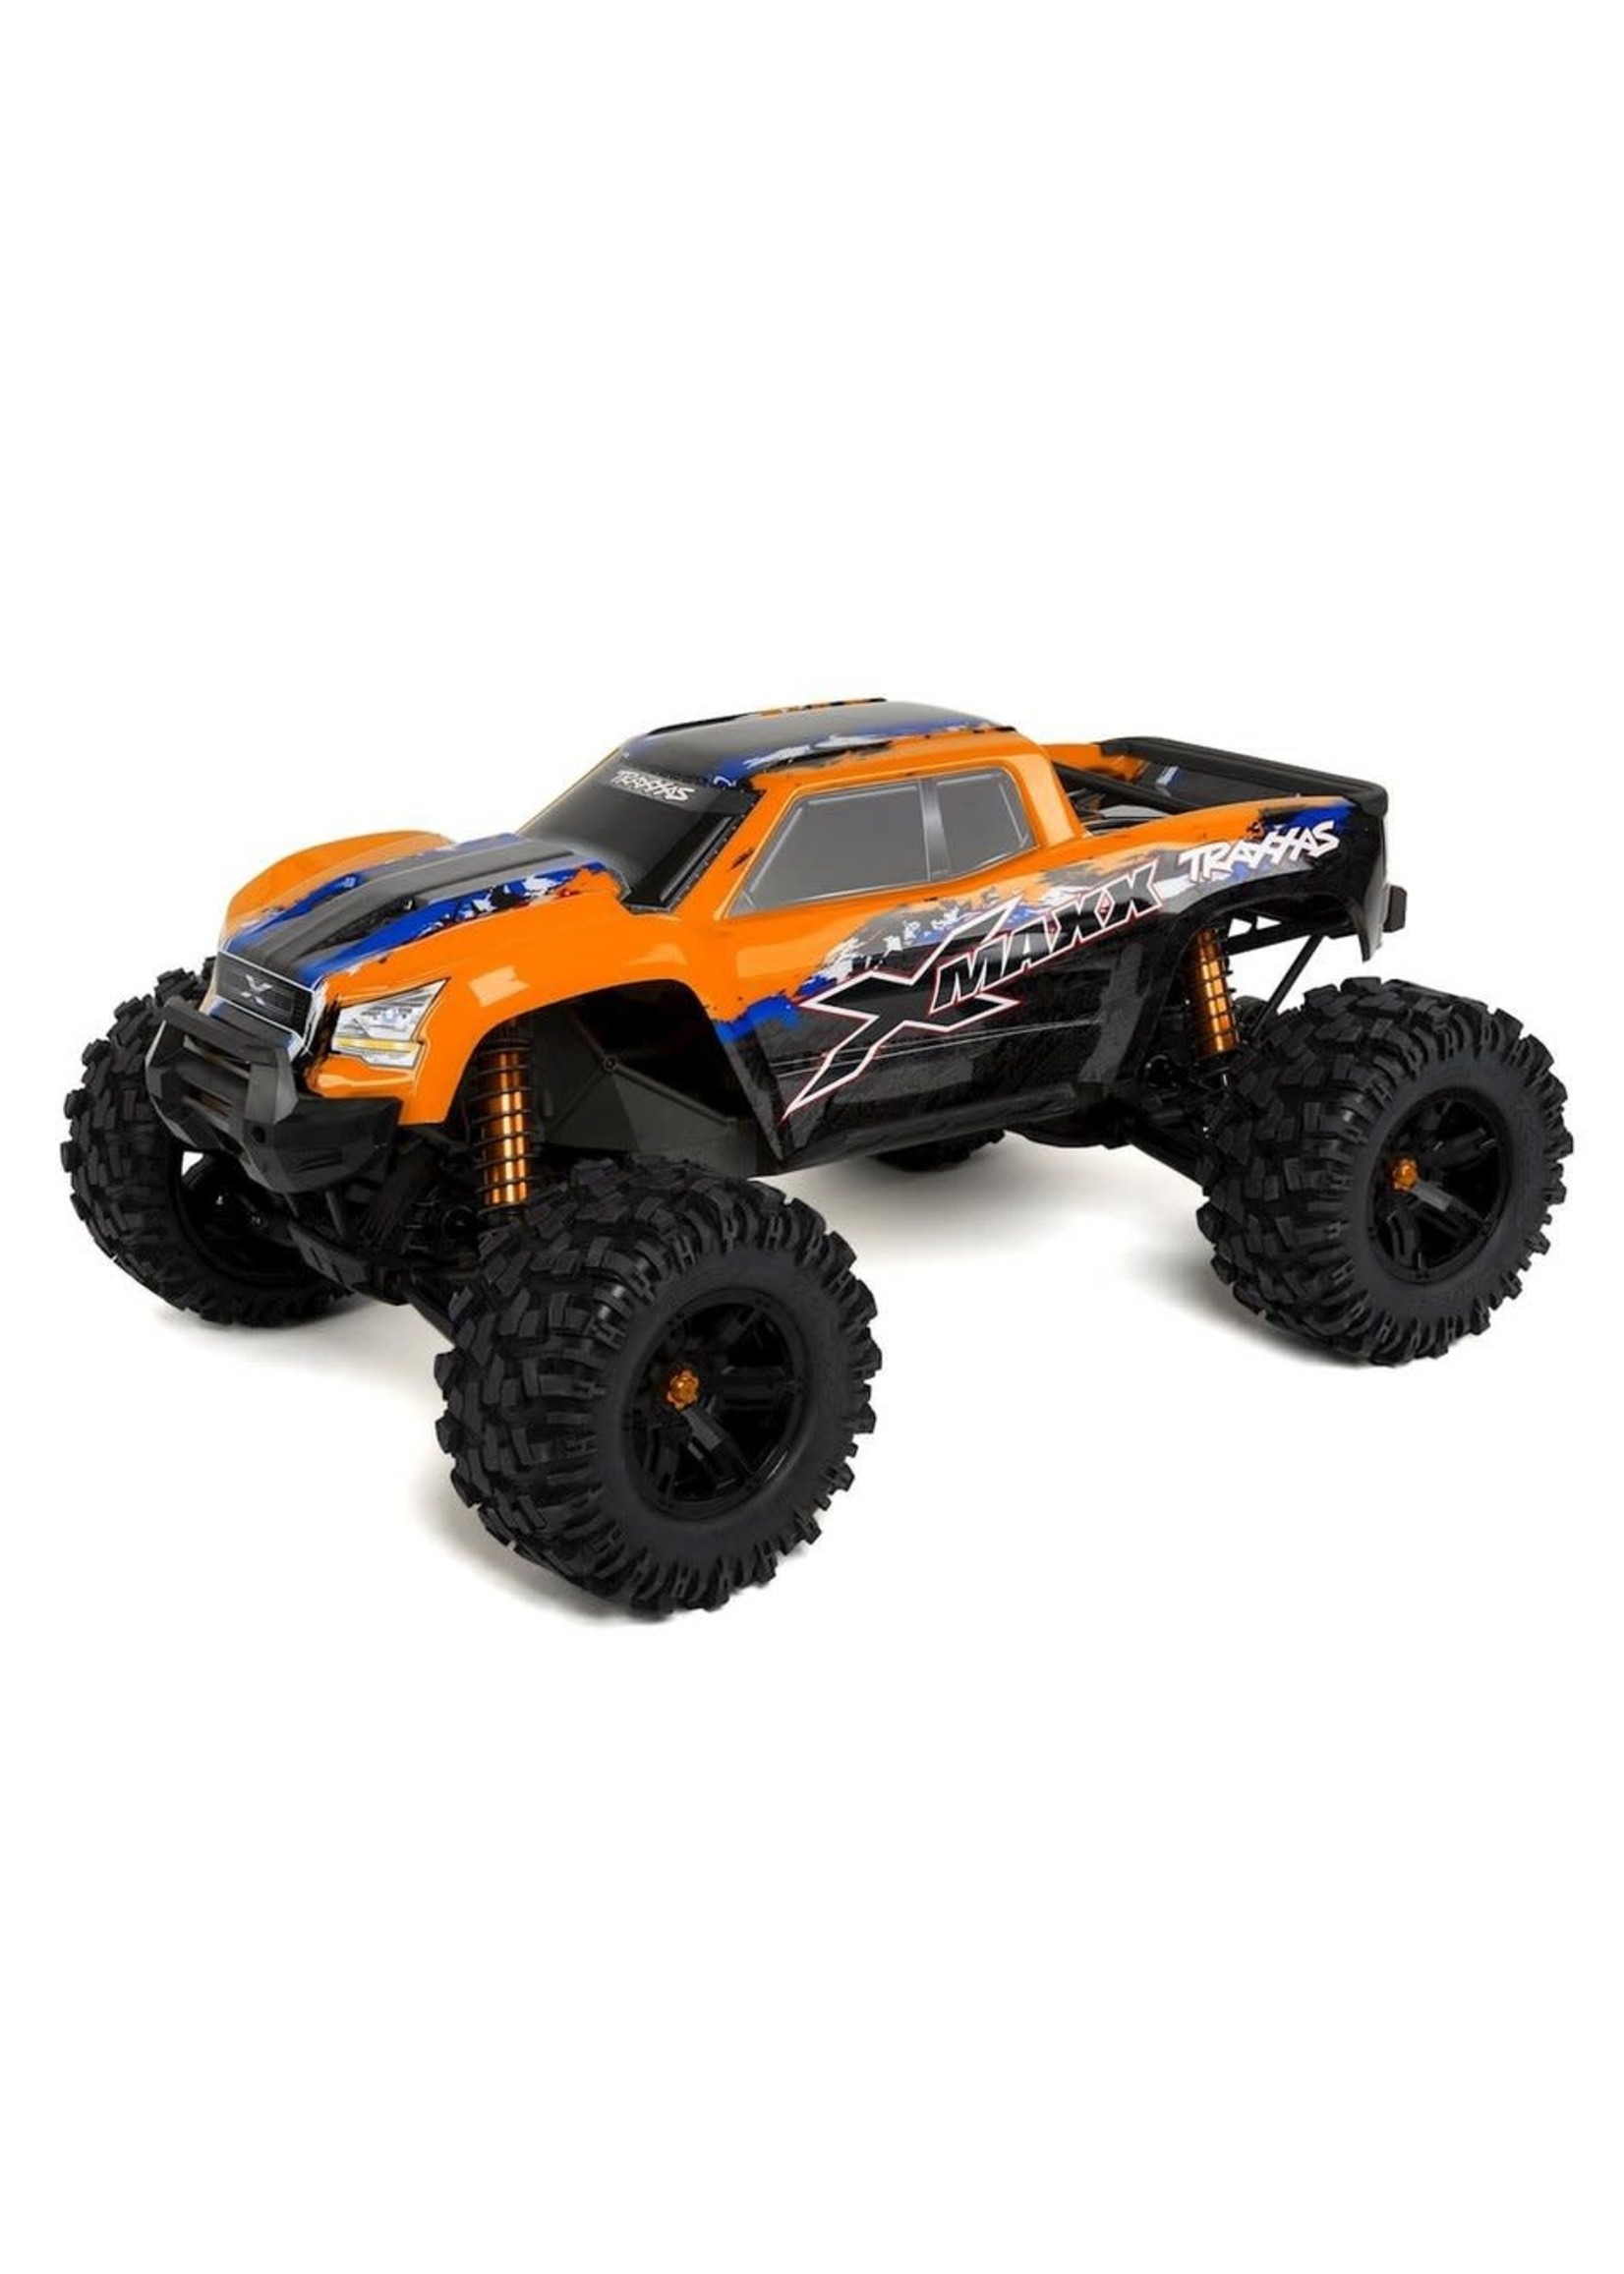 Traxxas X-Maxx : Brushless Electric Monster Truck with TQi Traxxas Link  Enabled 2.4GHz Radio System & Traxxas Stability Management (TSM)ORANGE